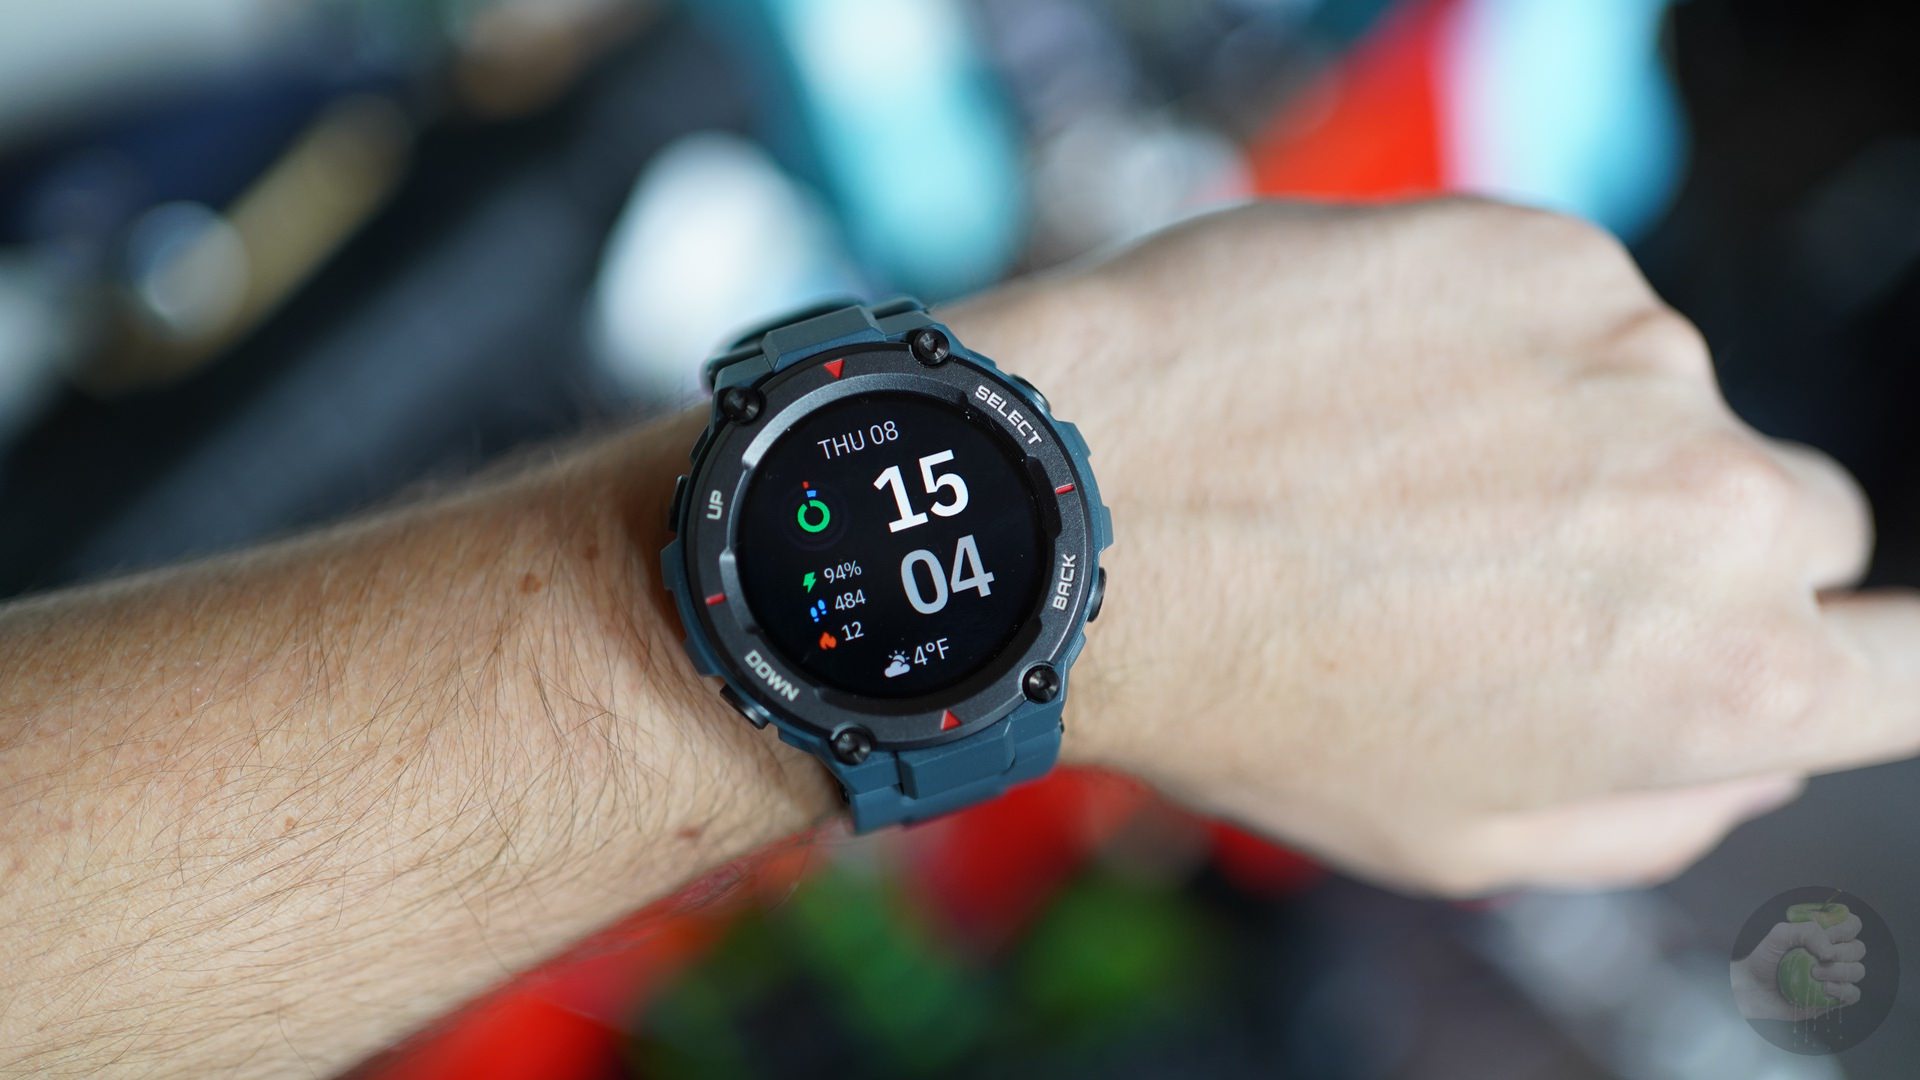 Amazfit T-rex Pro Review: Affordable, Rugged, Long-lasting